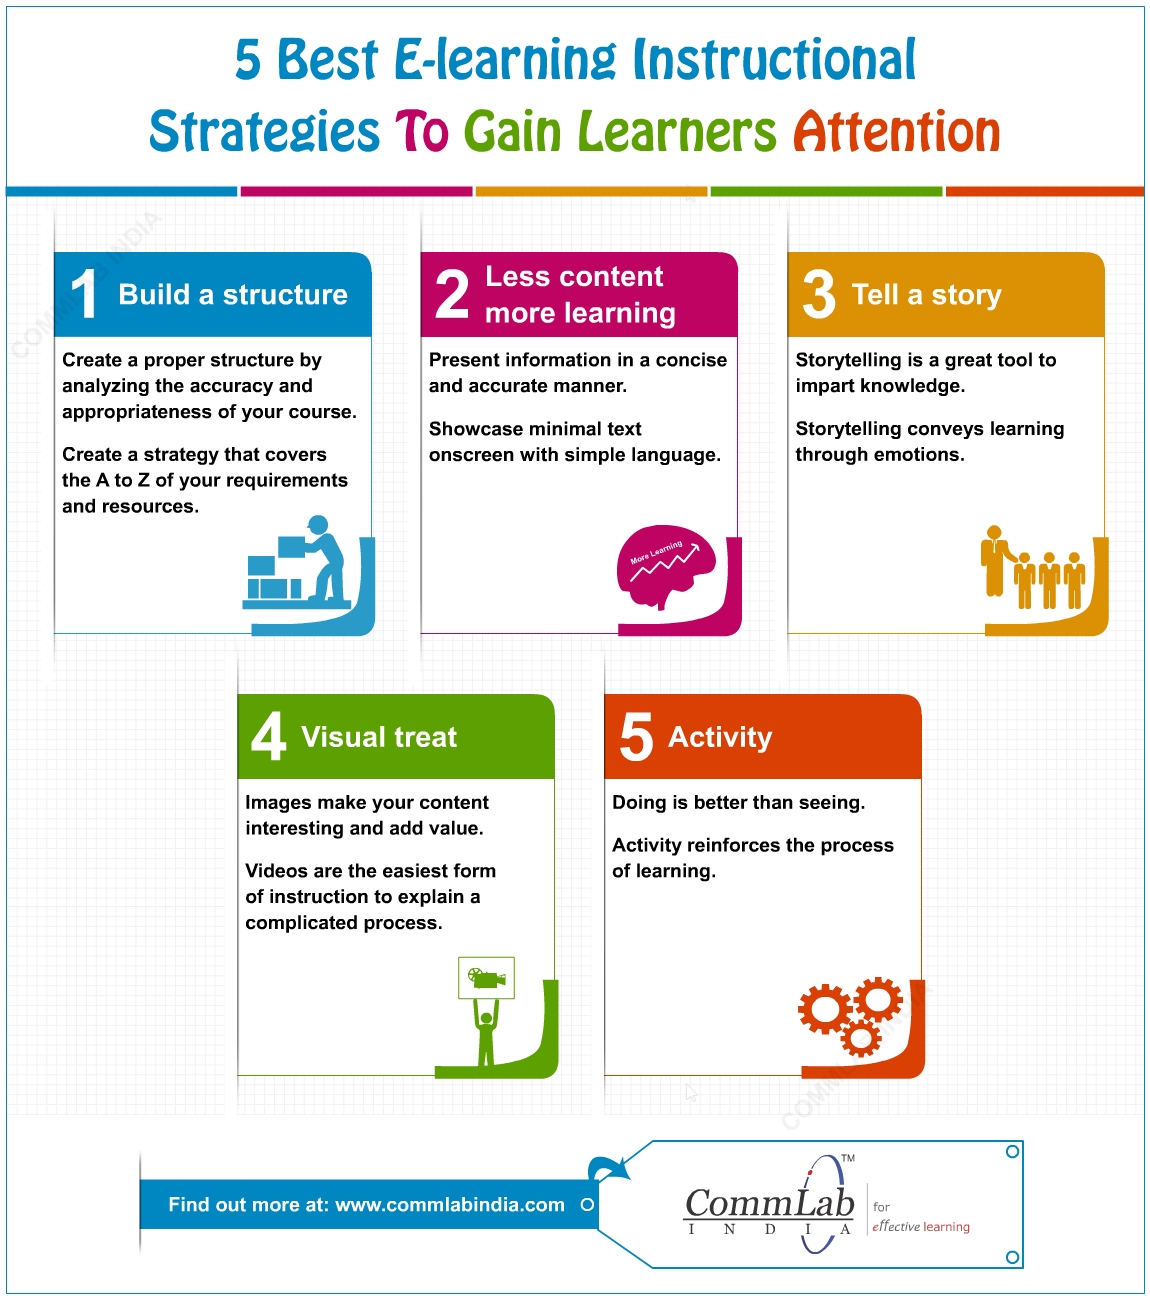 5 Proven Instructional Strategies to Gain Learners’ Attention – An Infographic